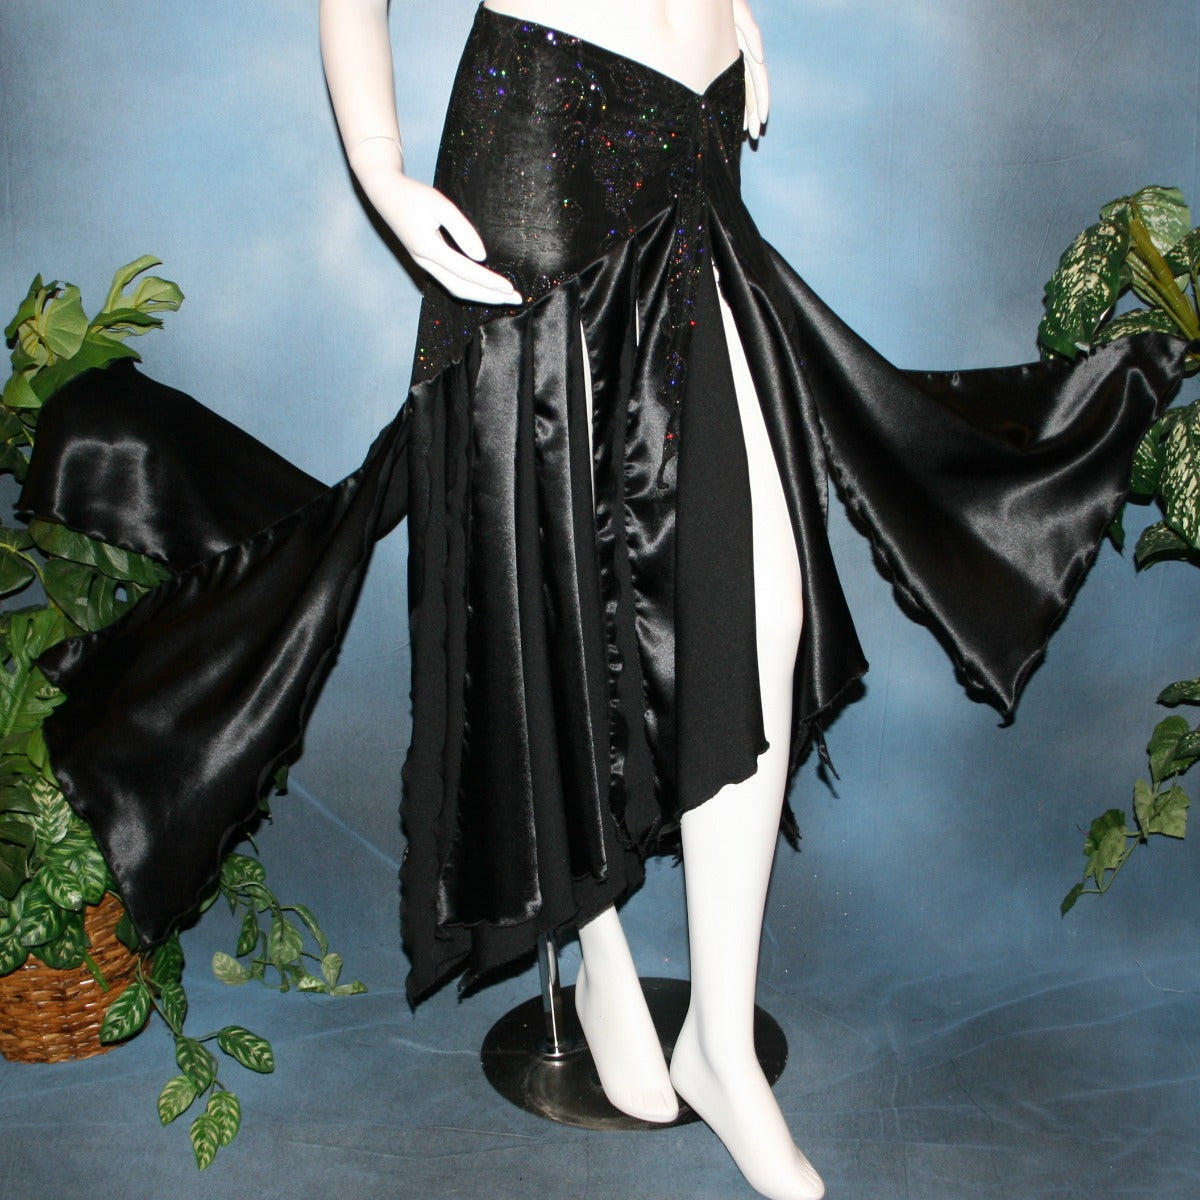 Black ballroom skirt created with a beautifully patterned glitter slinky sarong hip sash piece that flairs out to yards of black satin panels, would pair beautifully with a black body suit or one could be custom created for an extra fee.